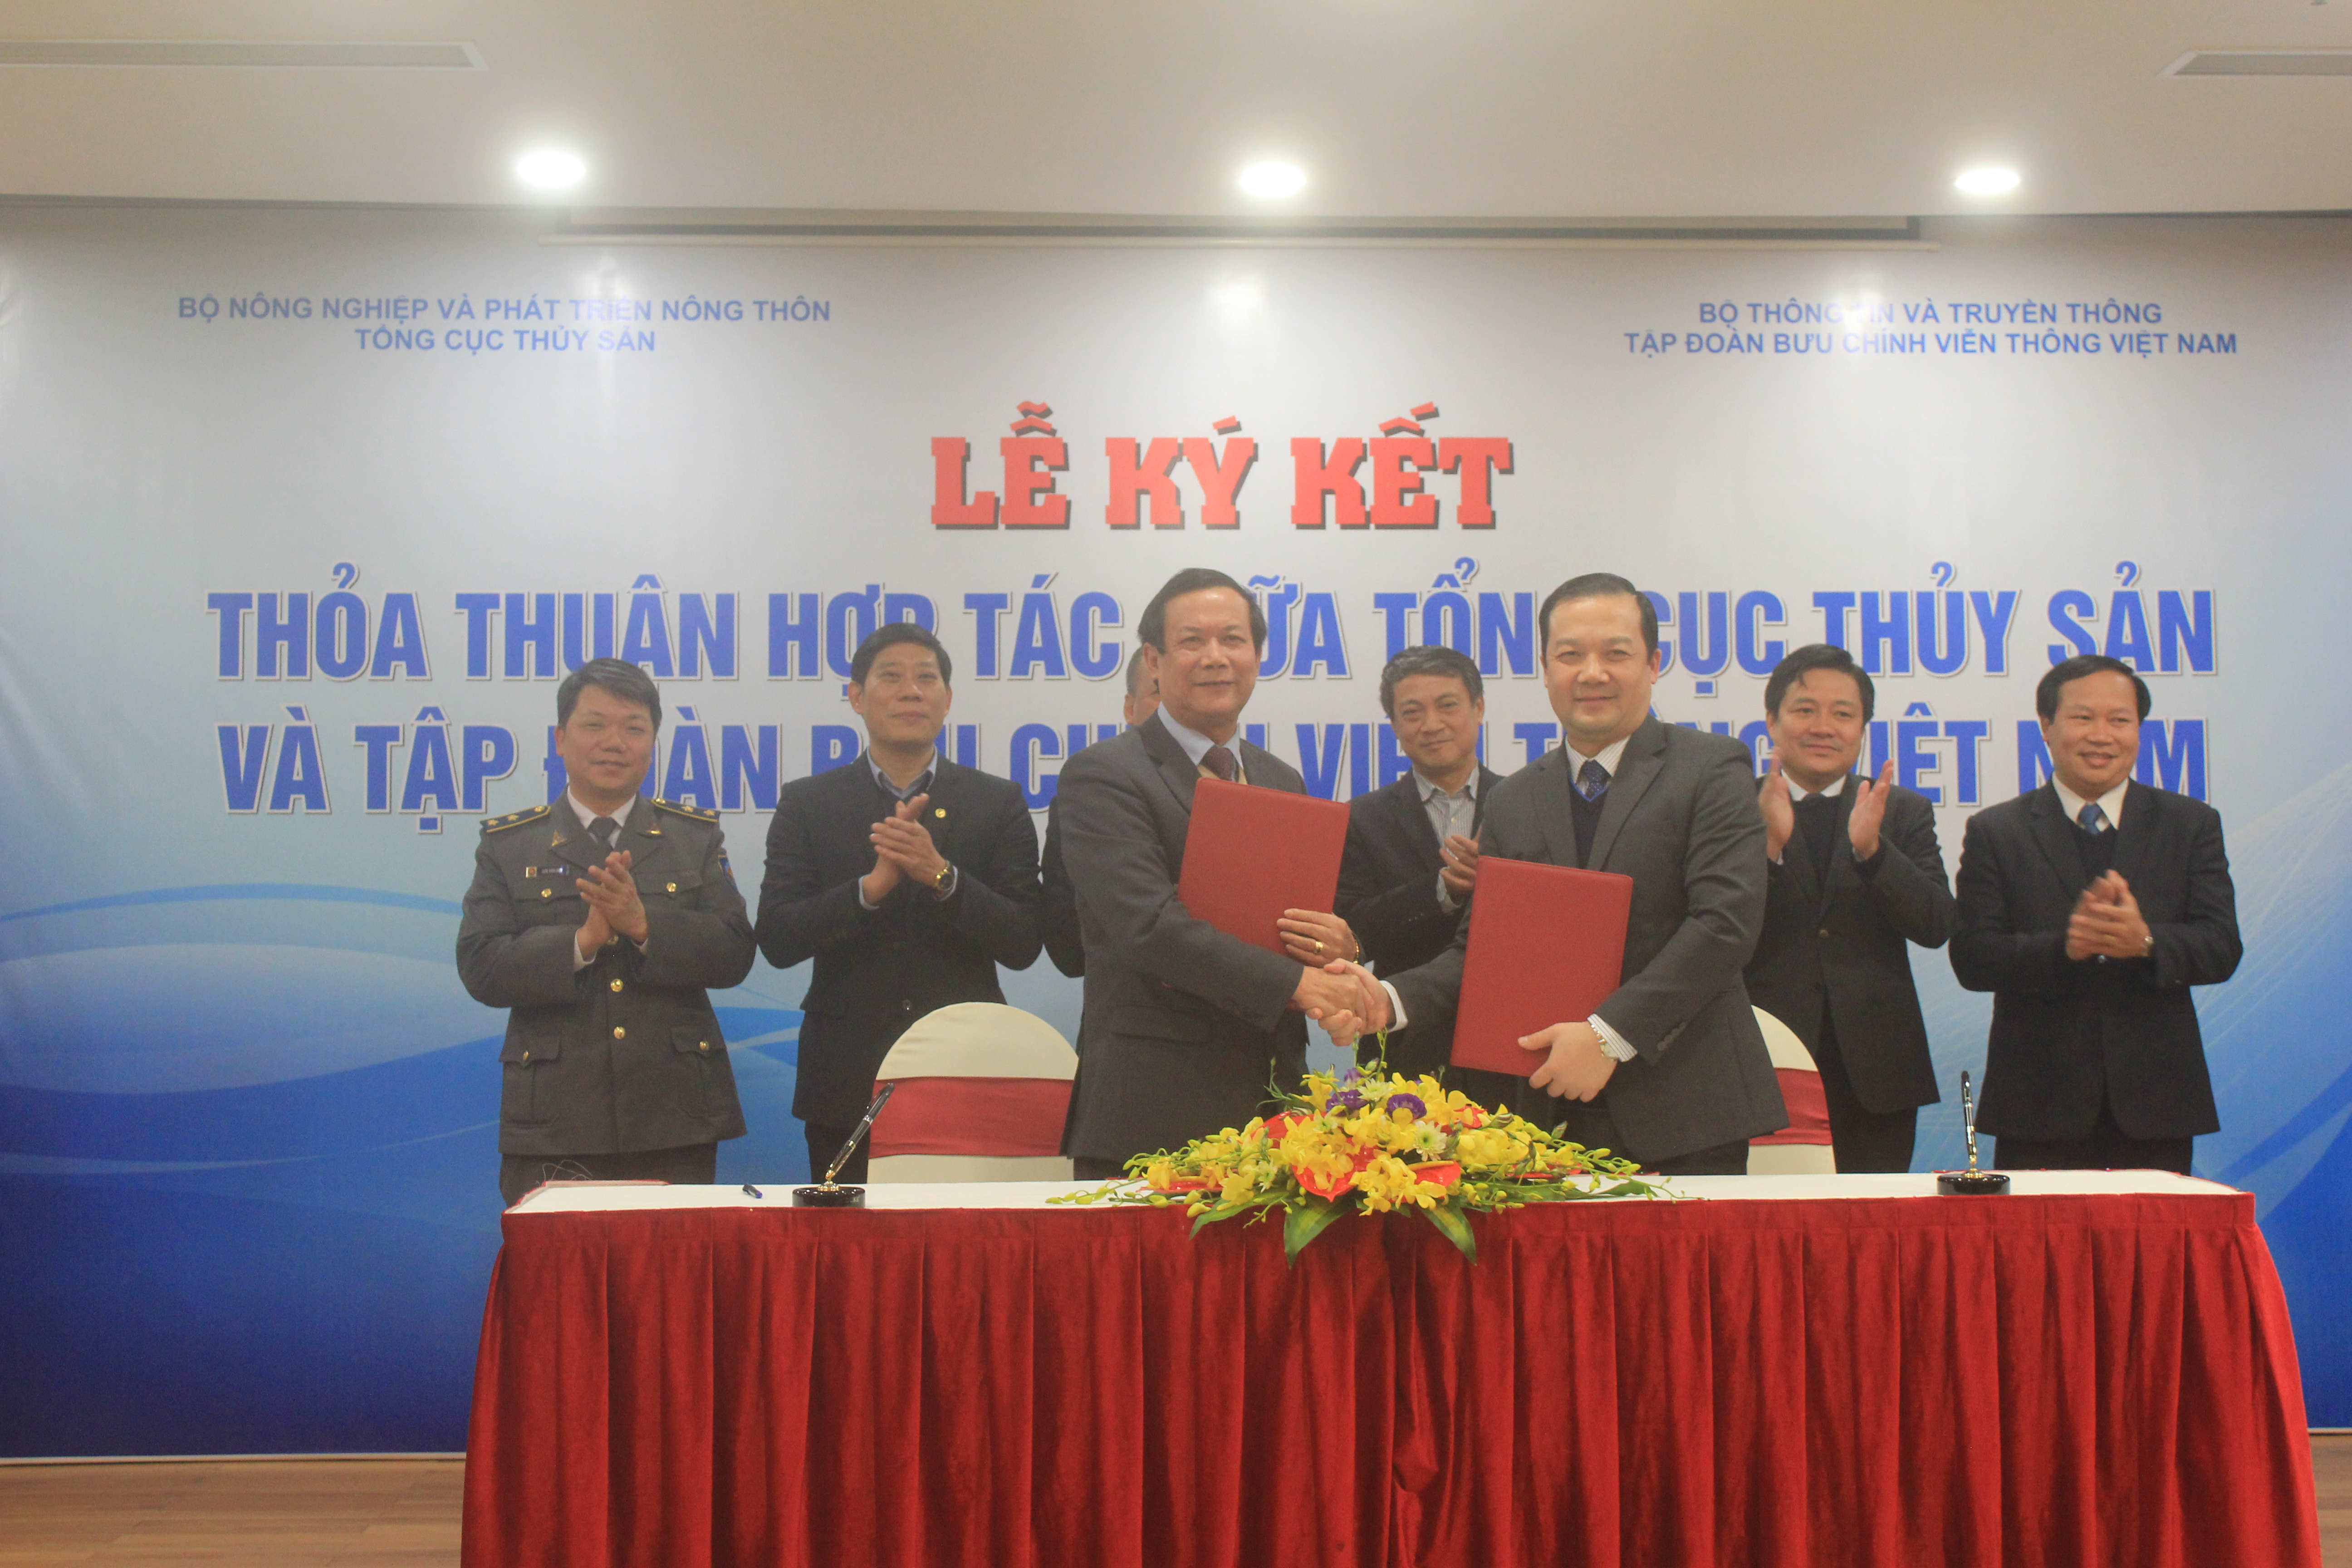 Signing ceremony of cooperation agreement between Directorate of Fisheries (D-Fish) and Vietnam Posts and Telecommunications (VNPT) Group